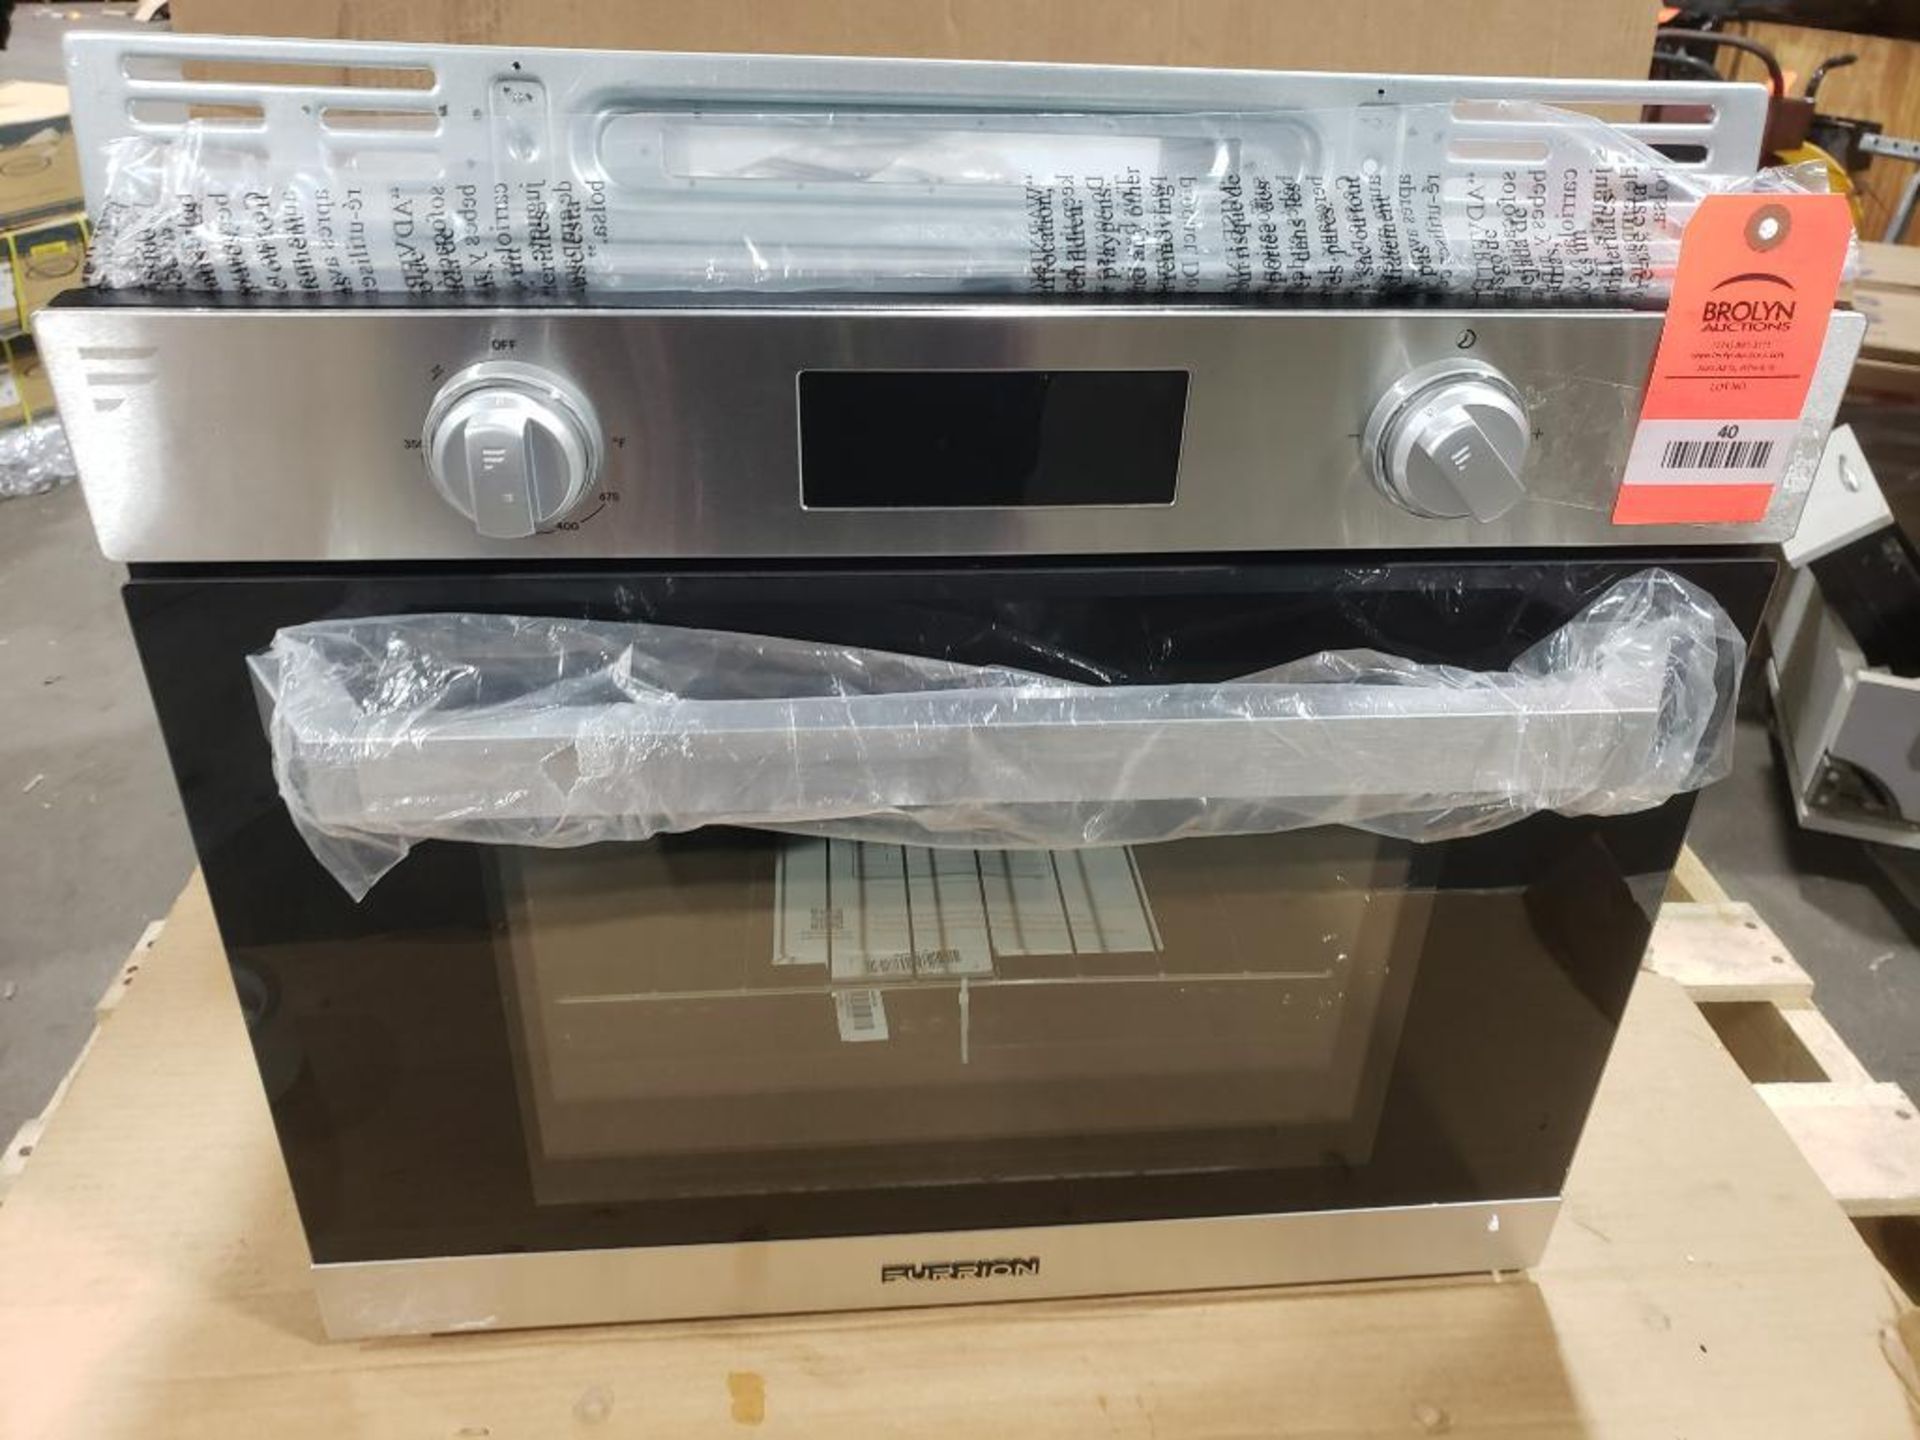 Furrion Chef Collection RV built in gas oven. FS22N20A-SS